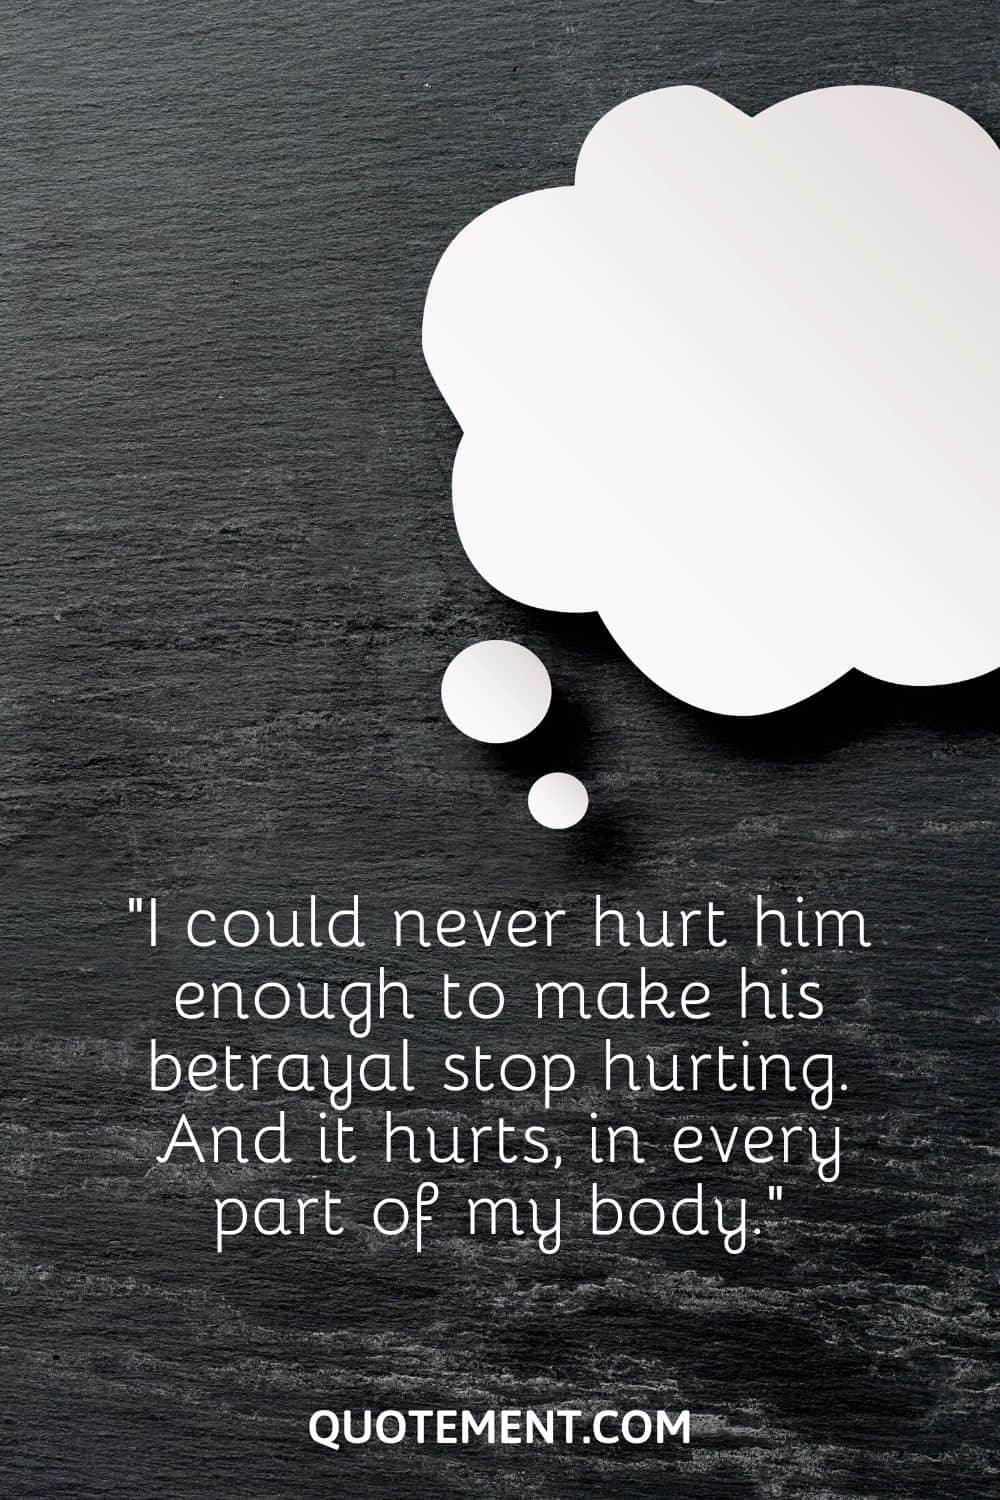 “I could never hurt him enough to make his betrayal stop hurting. And it hurts, in every part of my body.”